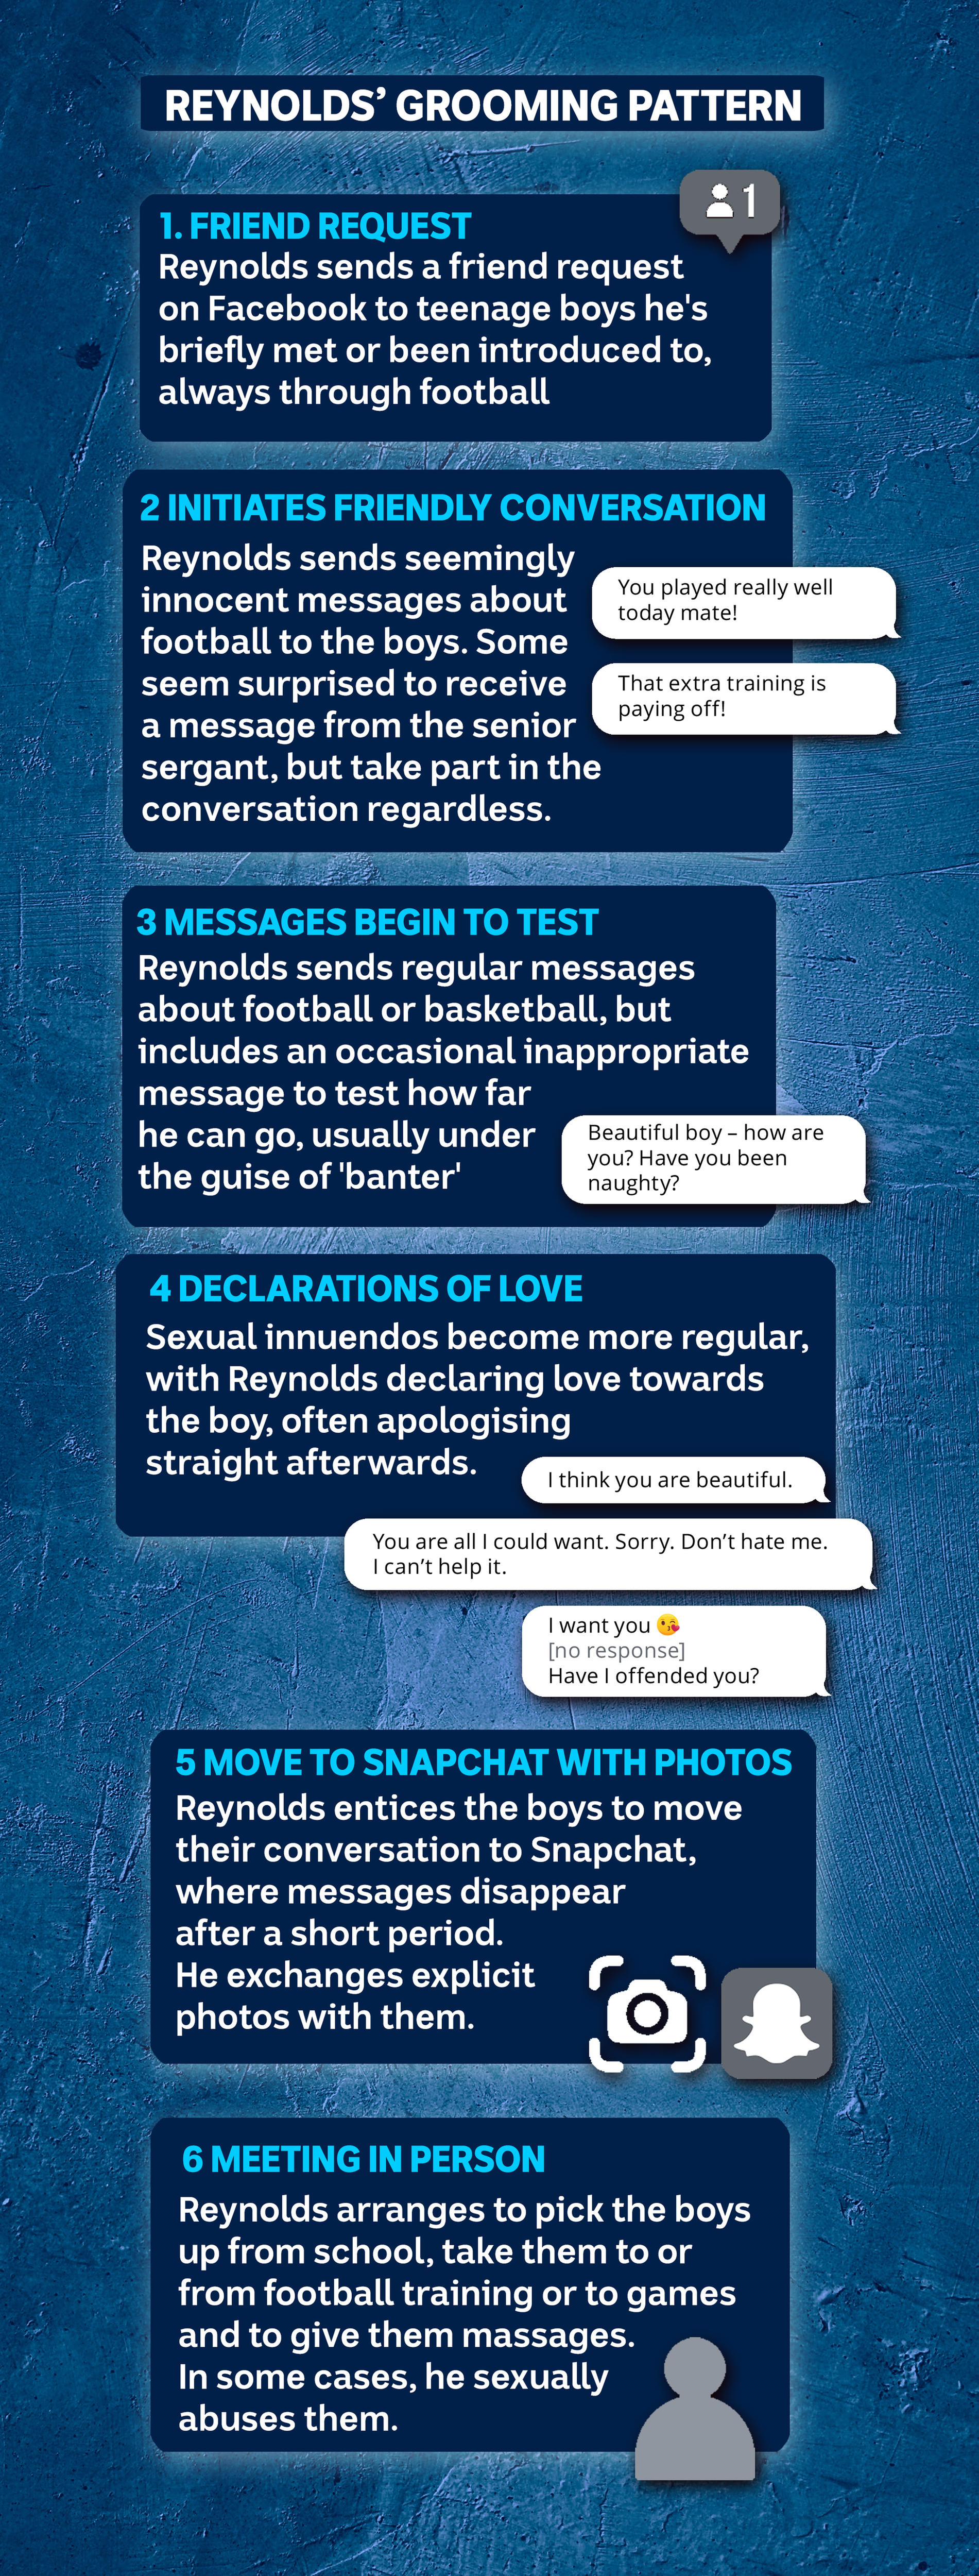 A graphic showing the way a man would use texts to groom young boys.